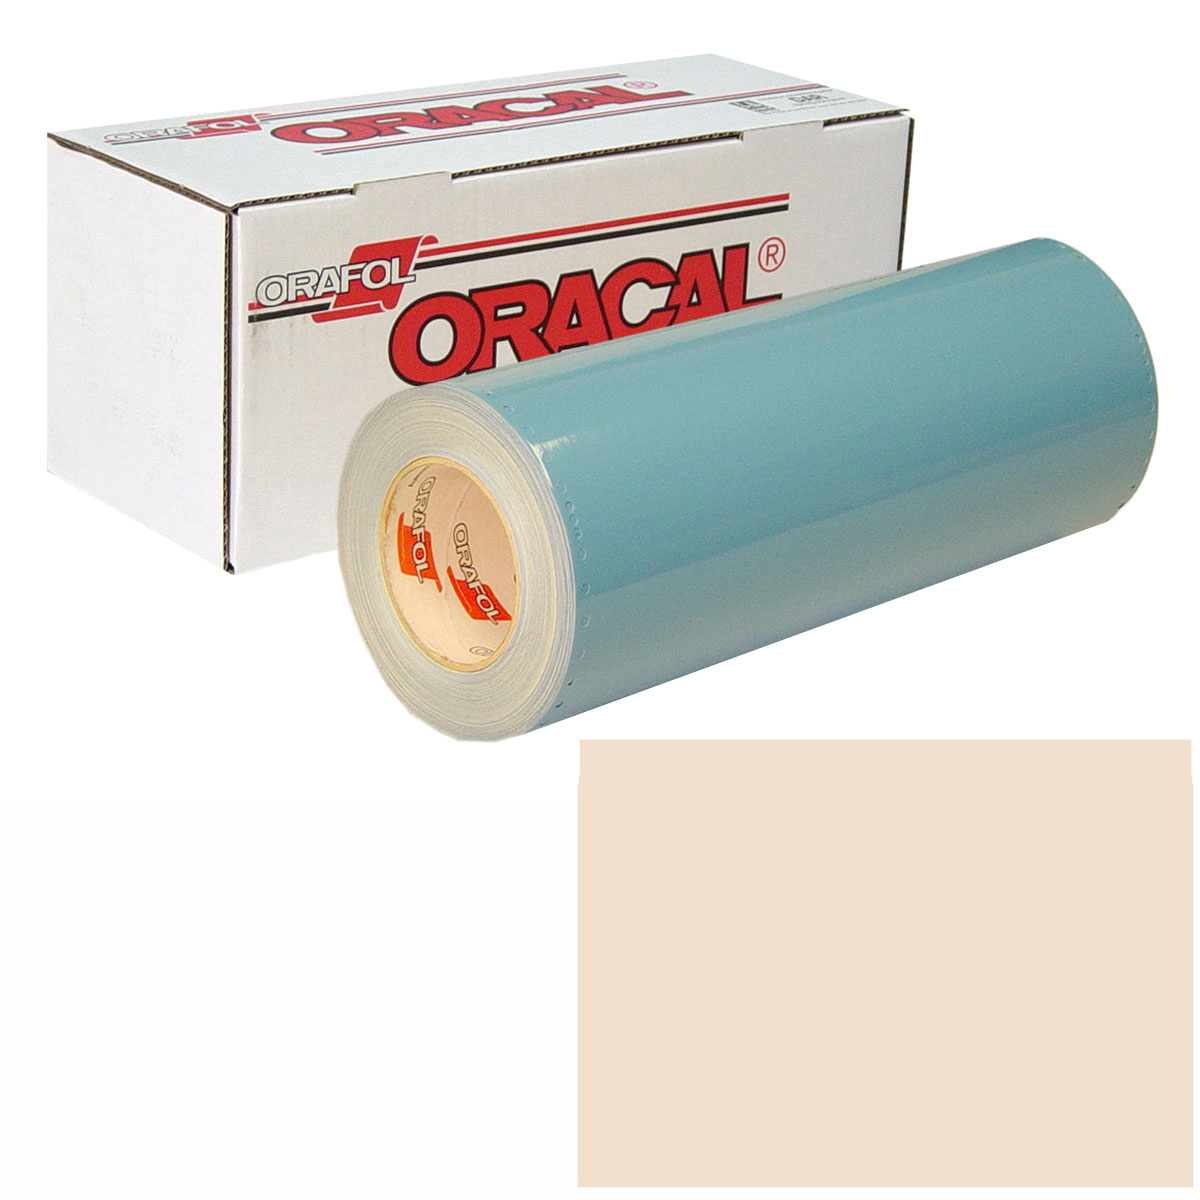 ORACAL 751 30in X 50yd 018 Light Ivory